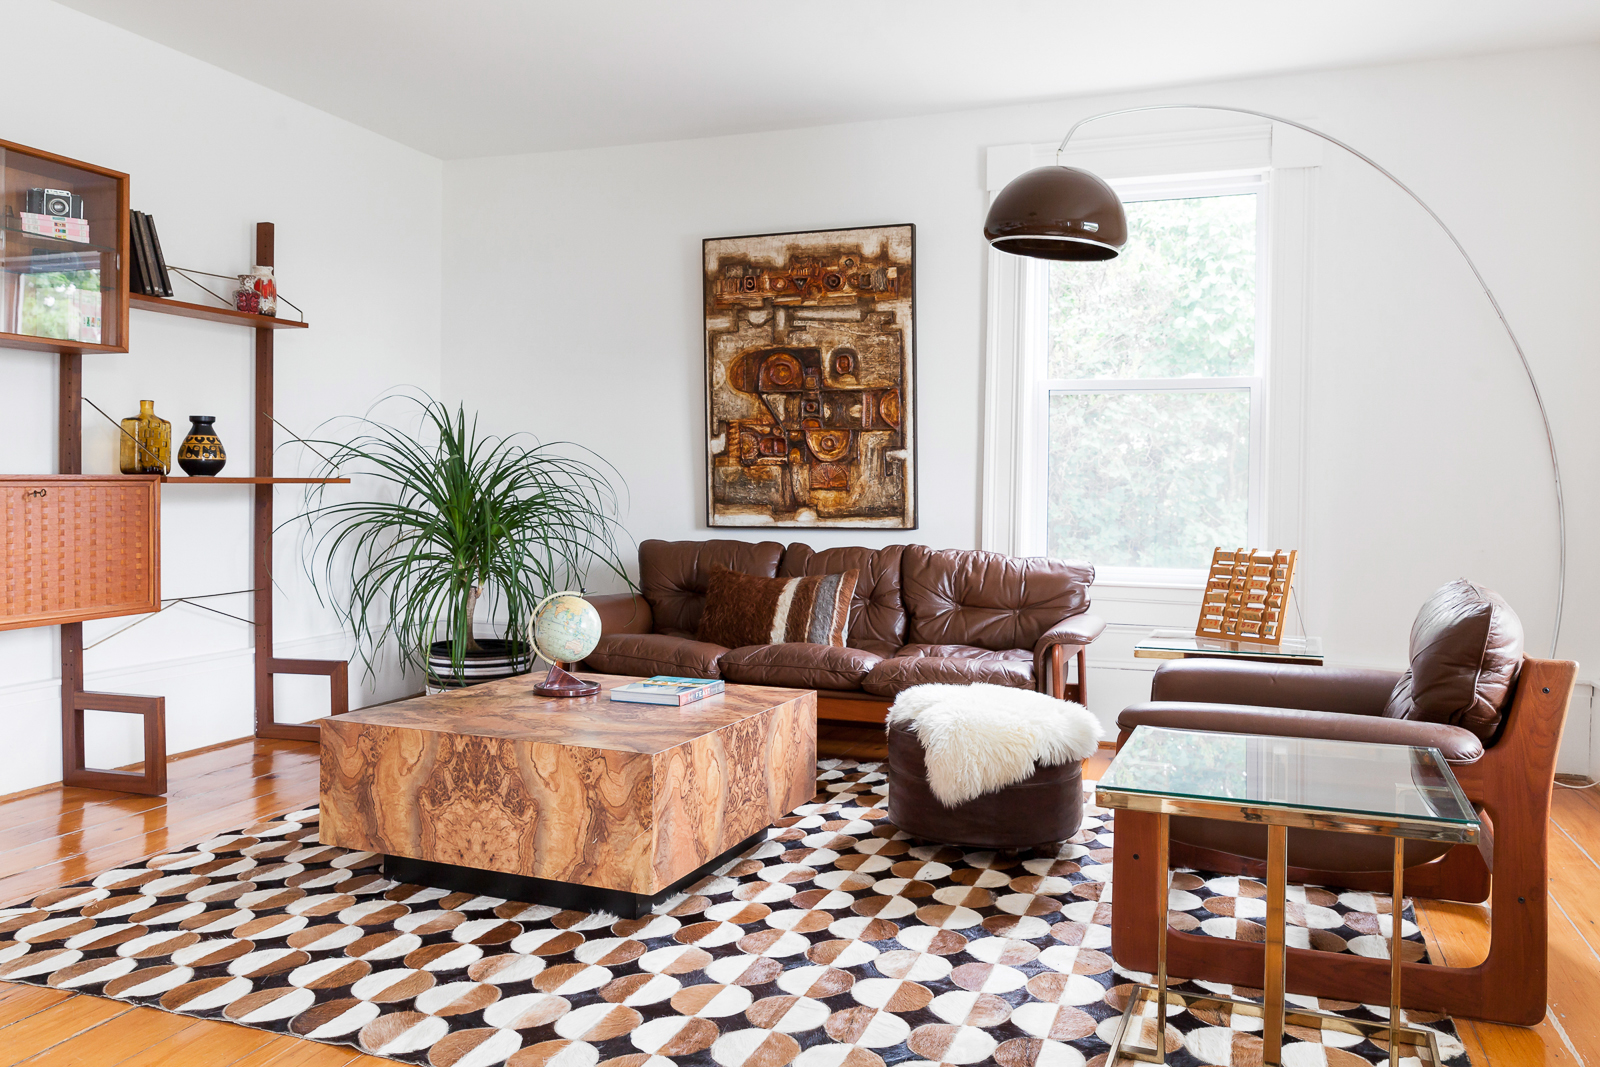 Bold patterned rug in the living room